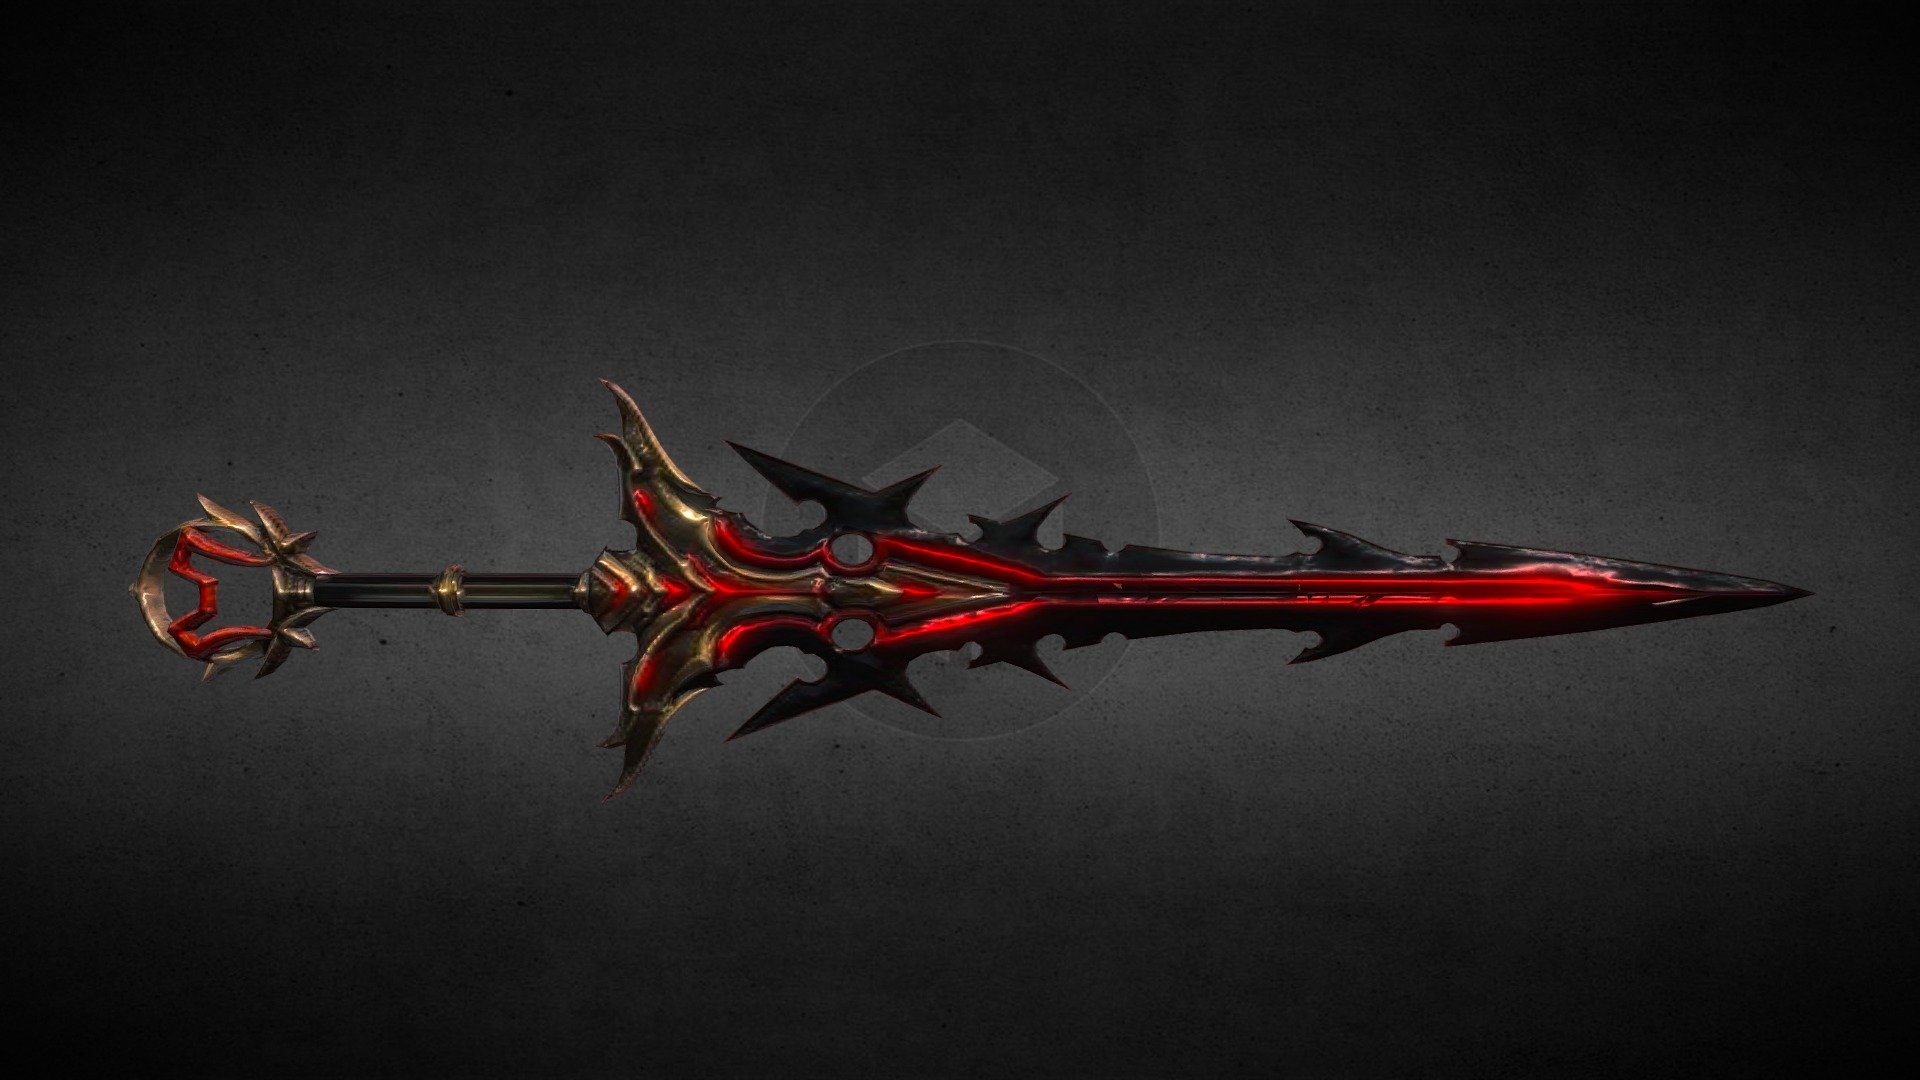 A weapon sword based on the concept art of Yann

I also want to thank everyone for their support, I will continue making these 3d models that I like so much! - Zamorak Godsword - Download Free 3D model by RewriteYourReality 3d model